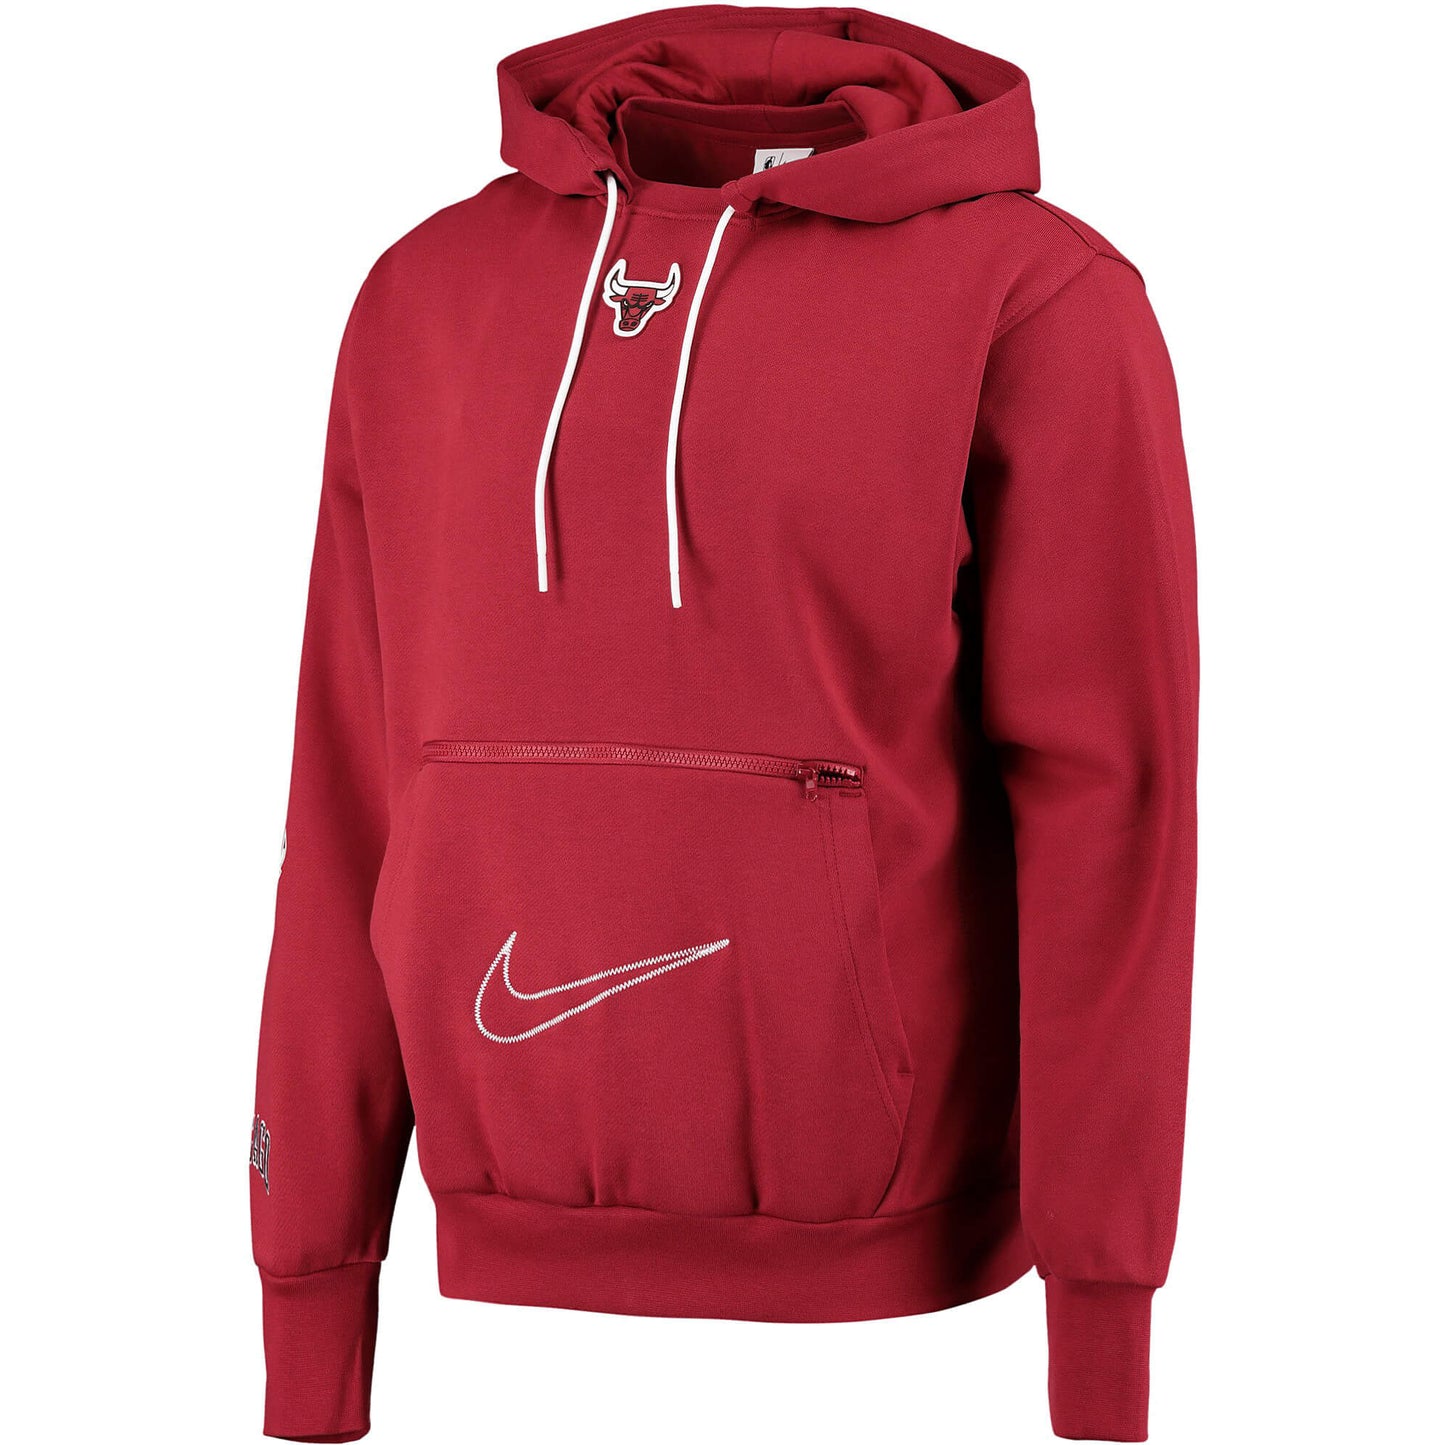 Nike Nk Fleece Pullover Courtside Ce - 8-20Y - Chicago Bulls Red